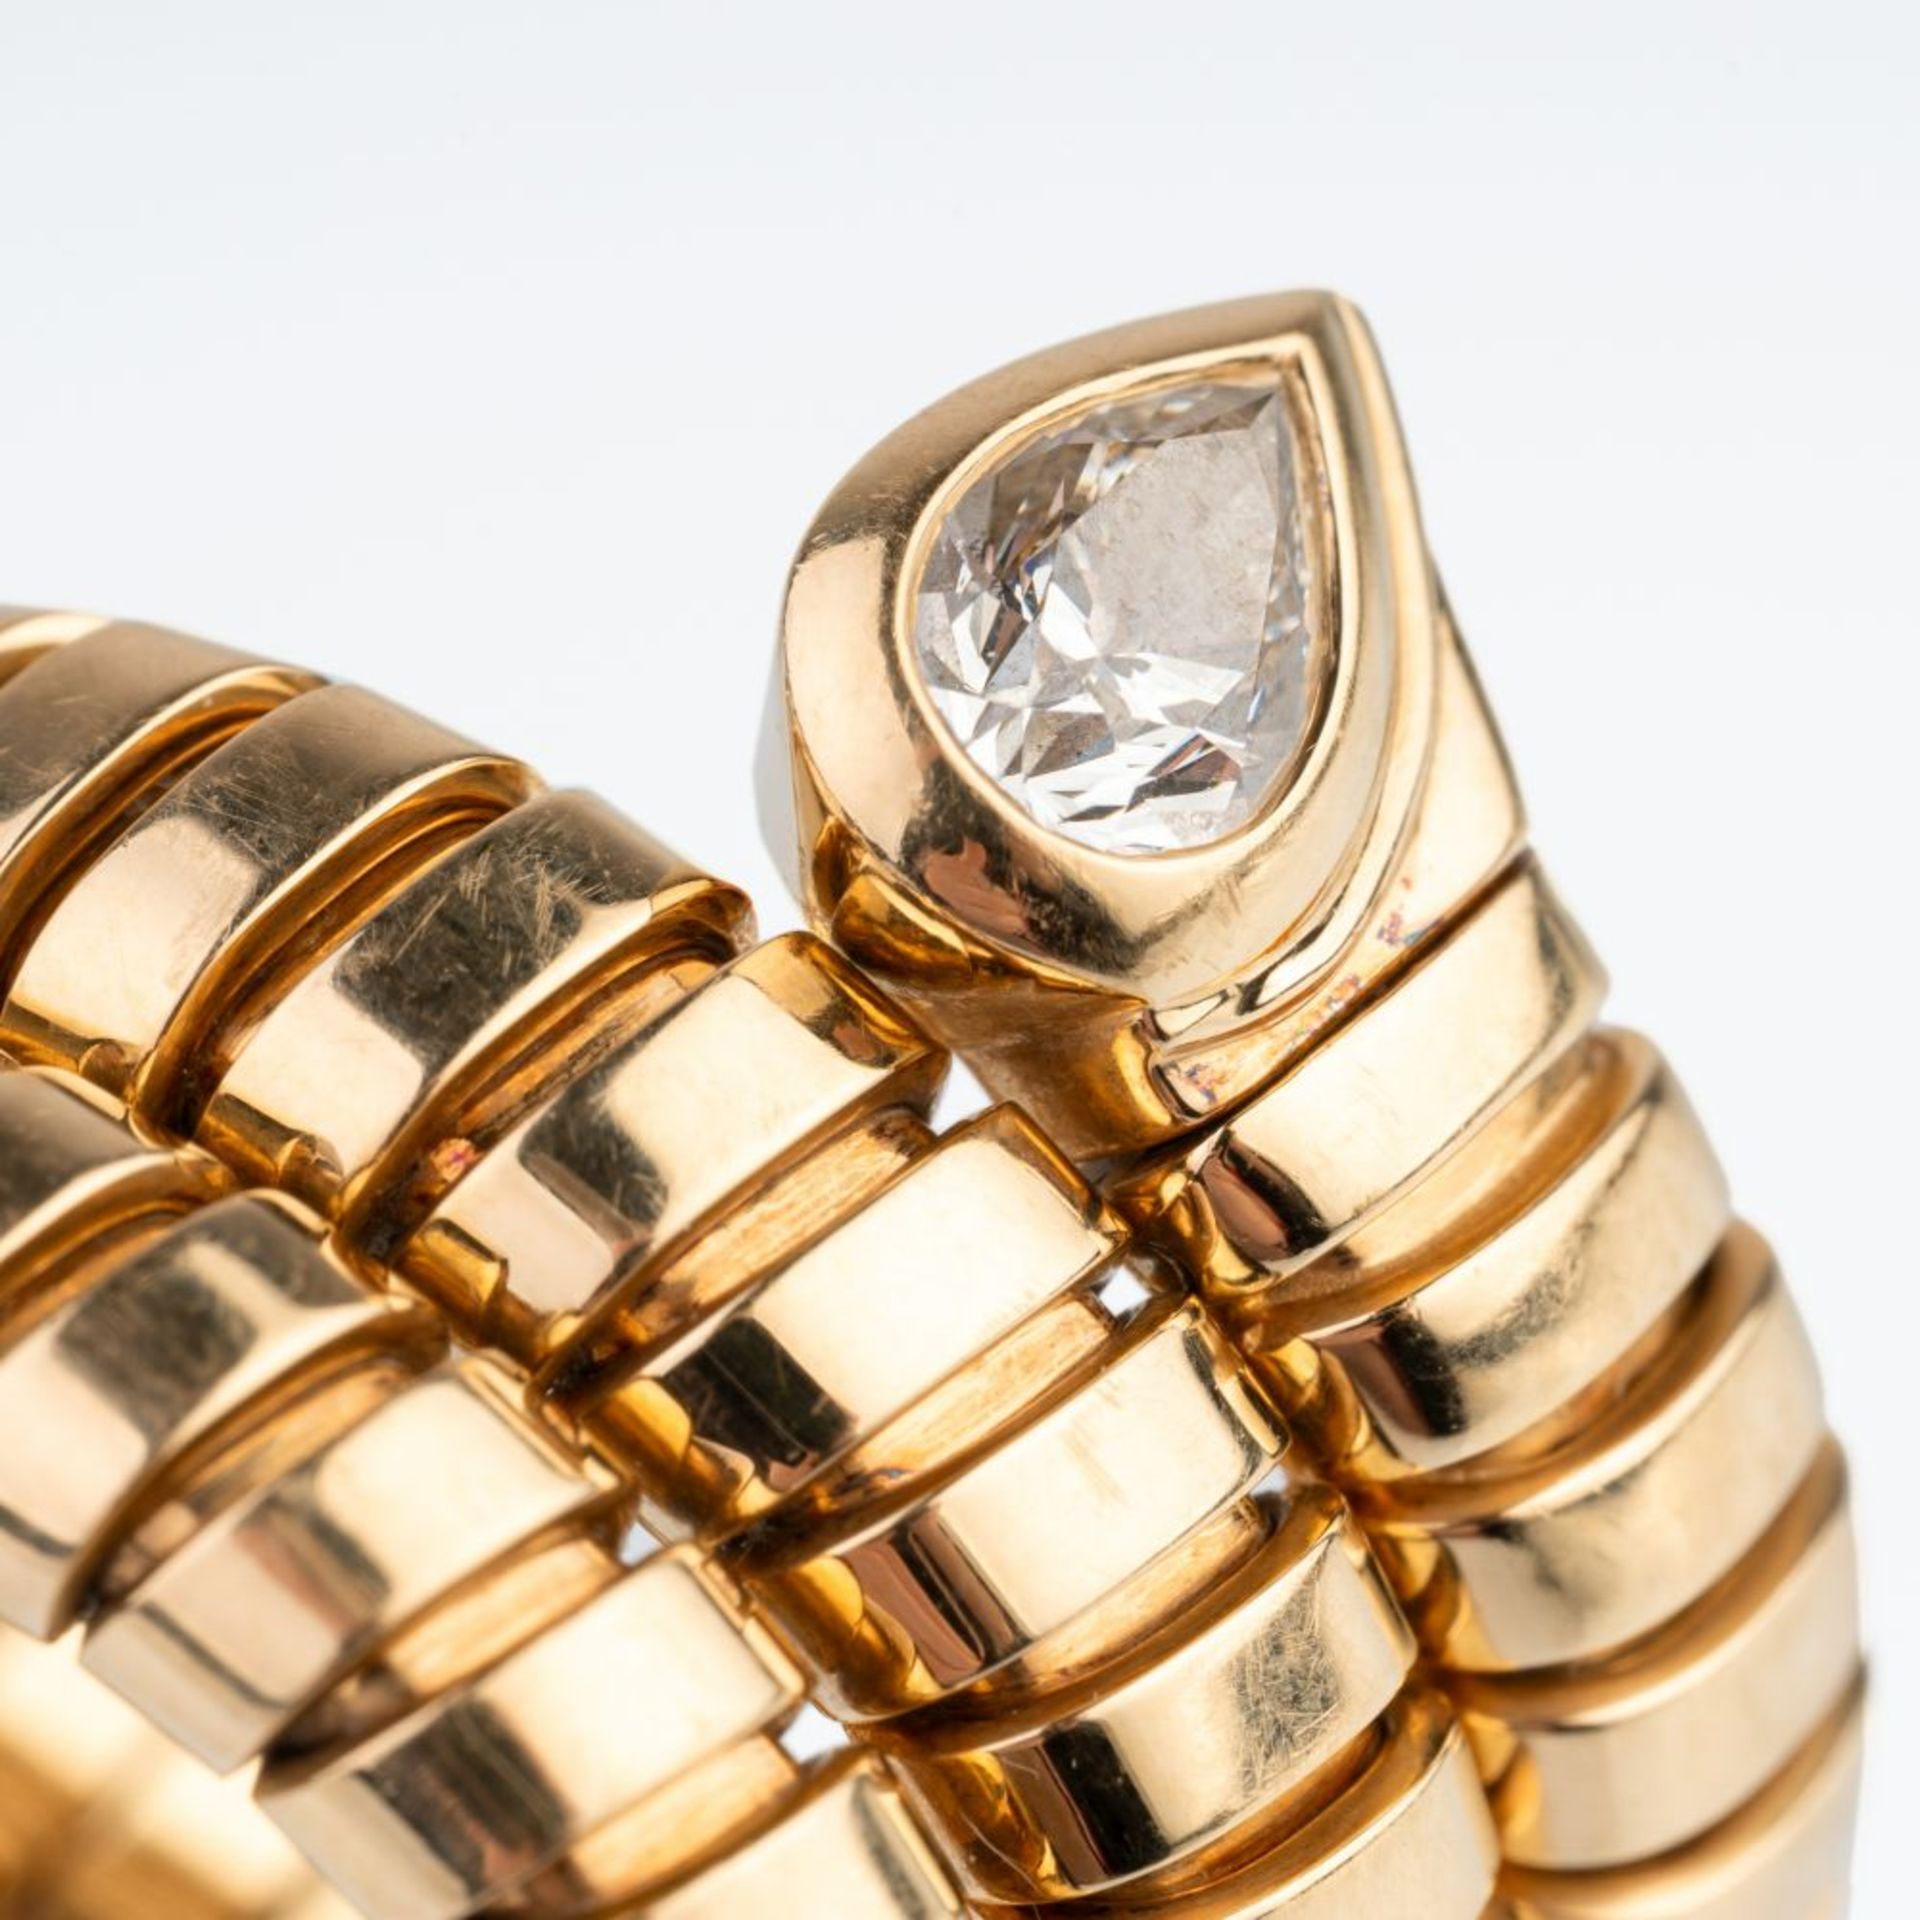 Bulgari. A Gold Ring with Diamond 'Serpentine'. - Image 3 of 4